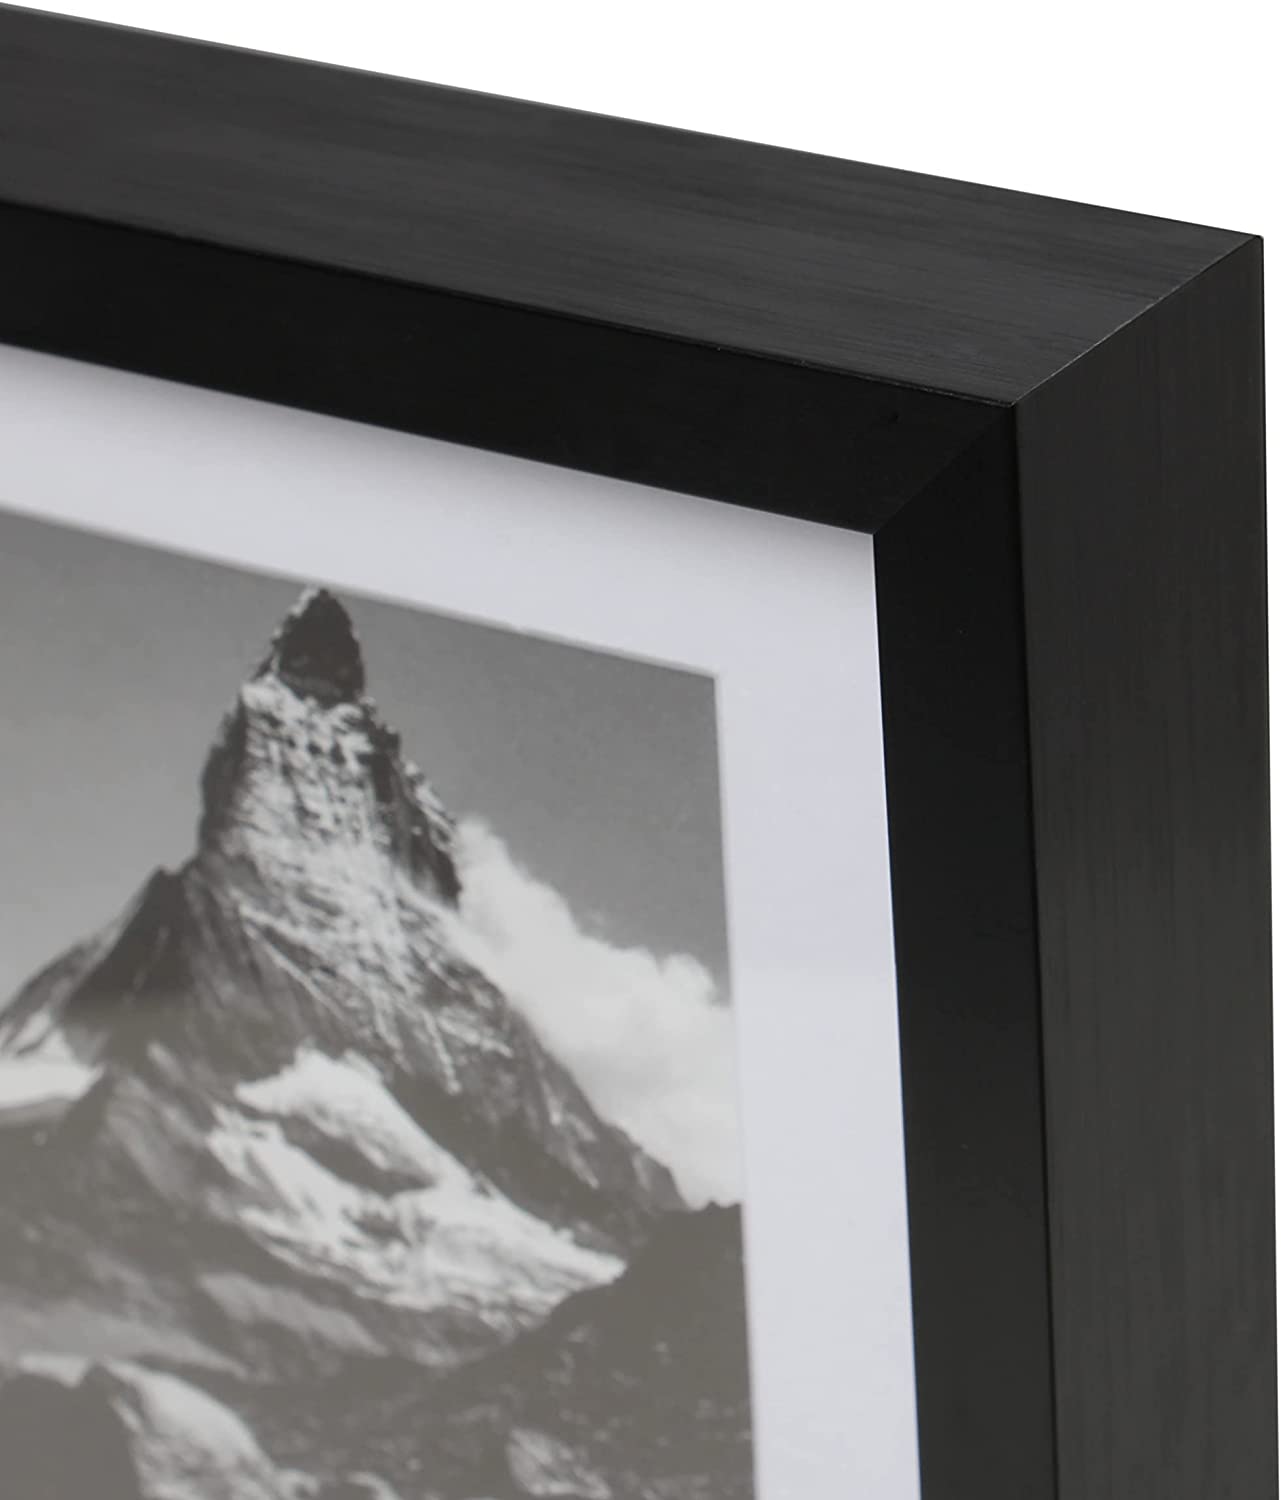 18" x 24" Deluxe Black Aluminum Contemporary Picture Frame, 12" x 18" Matted